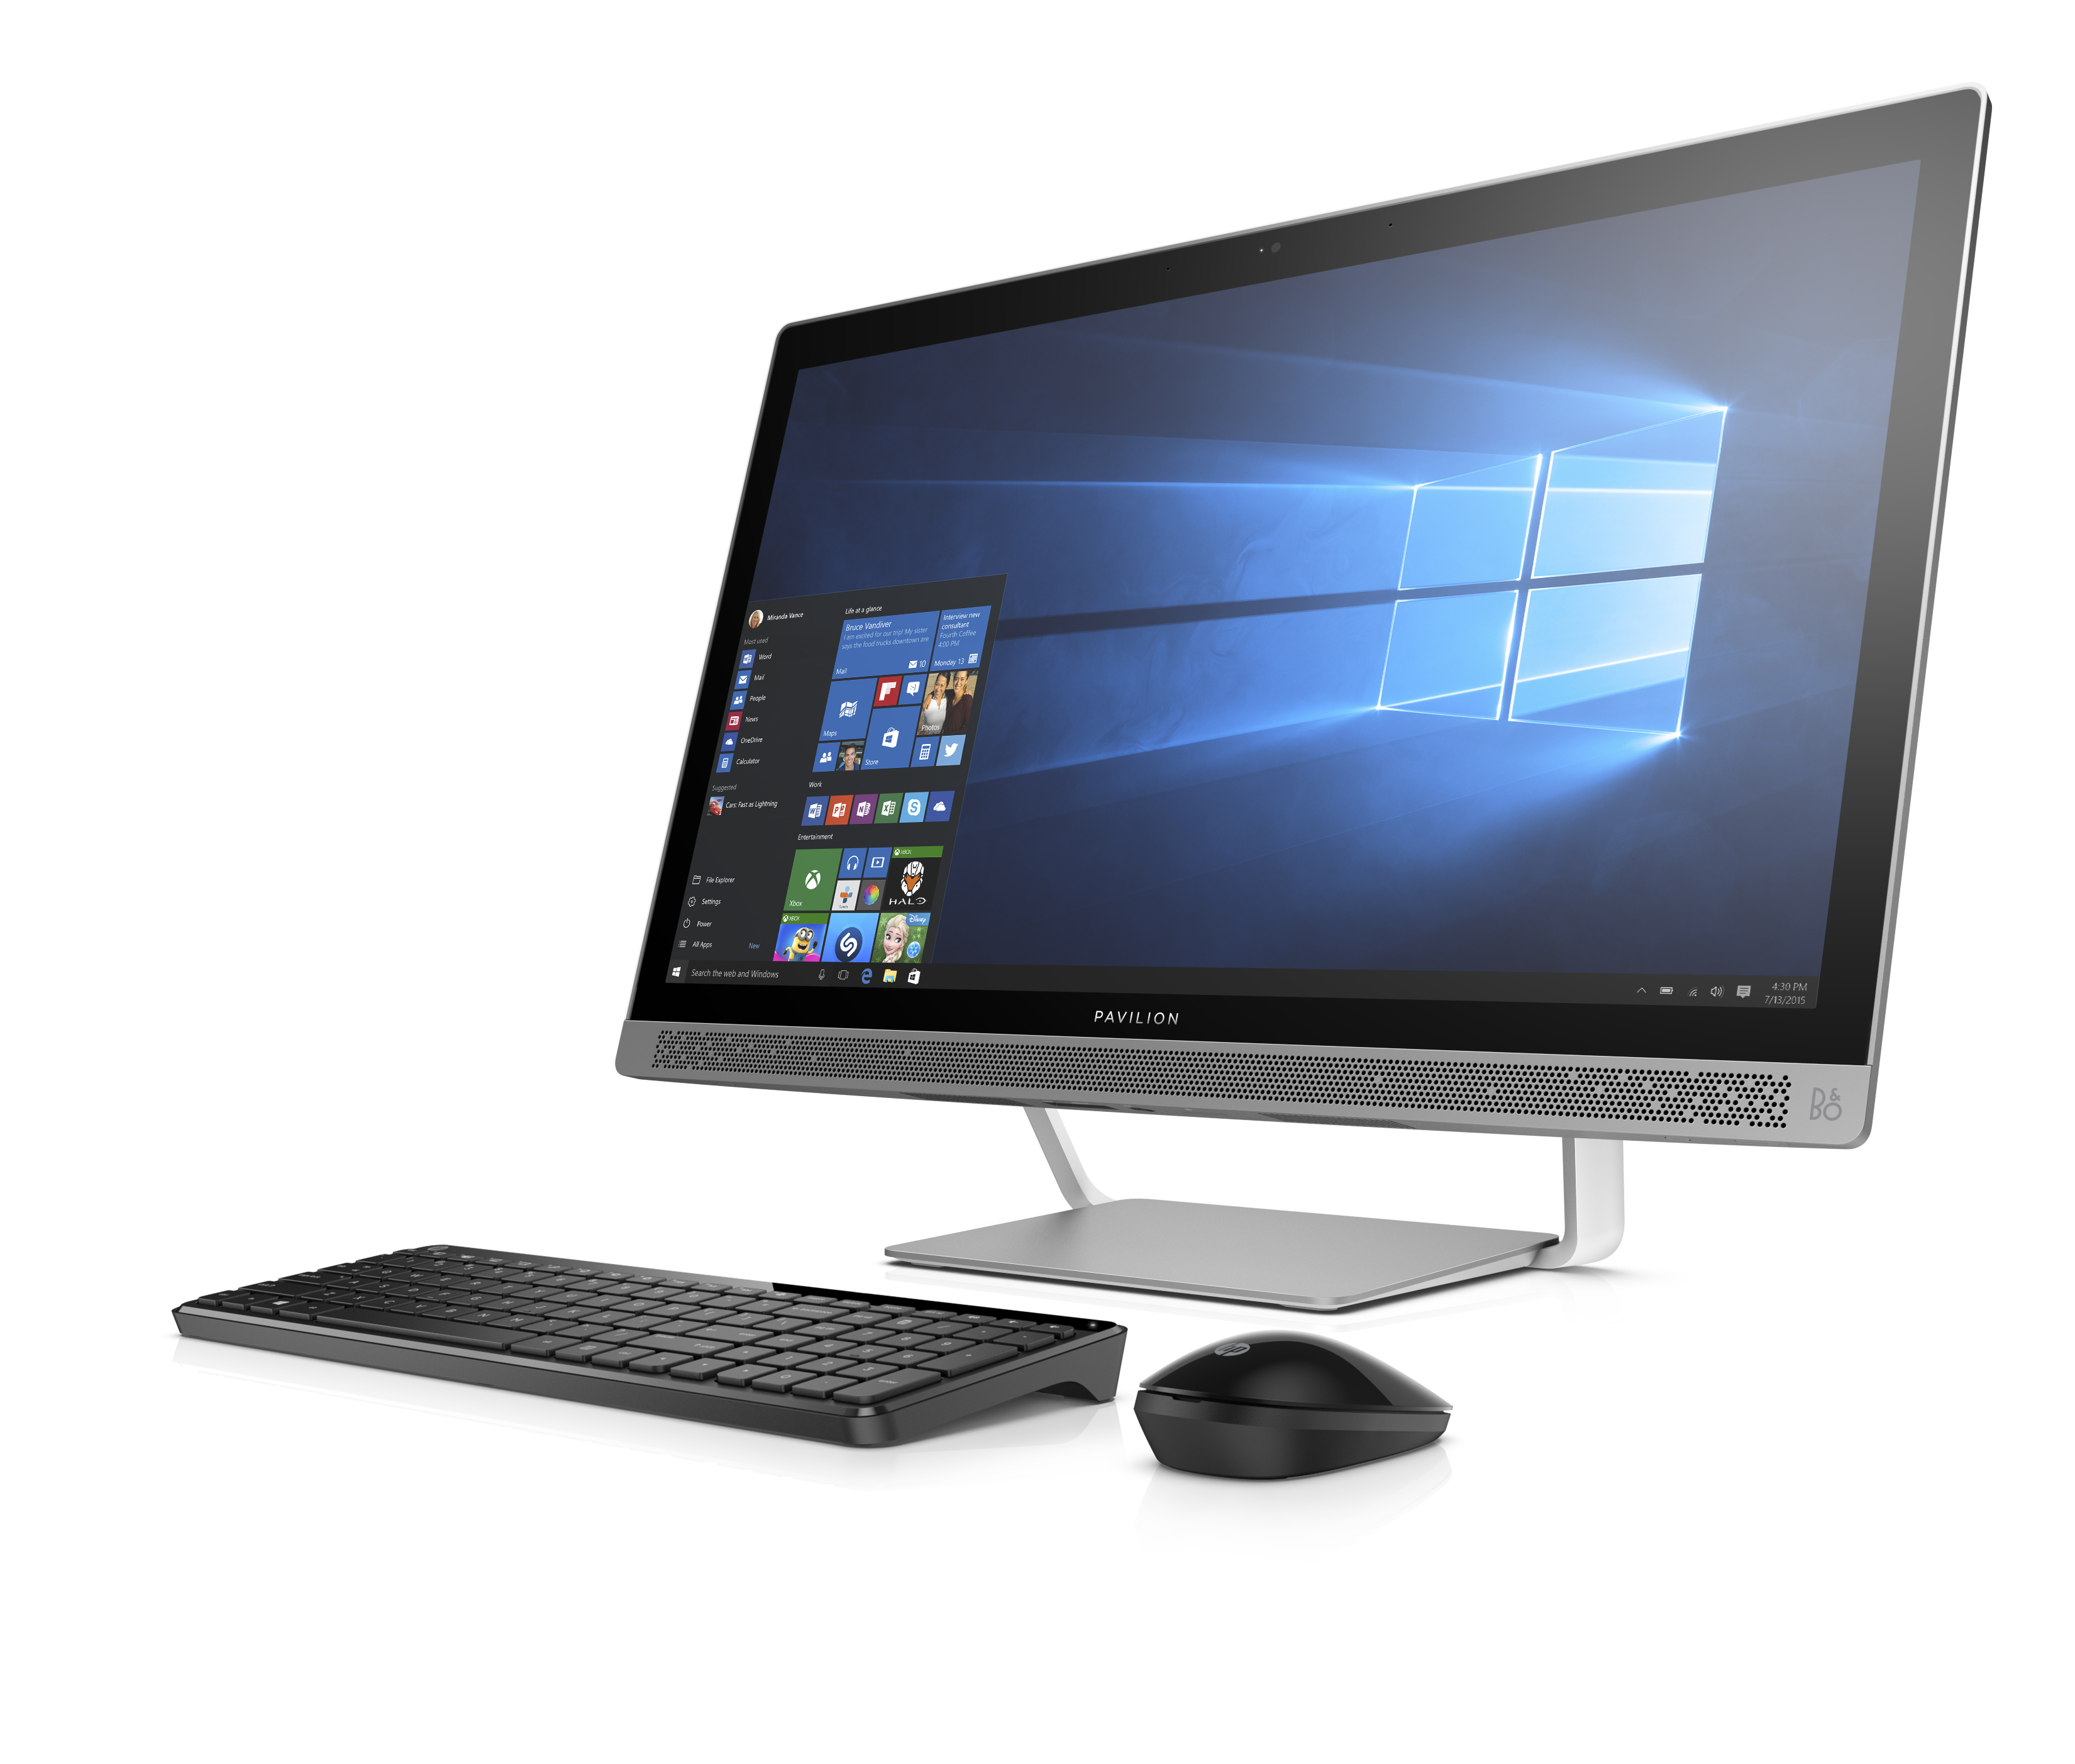 The HP Pavilion All-in-One with Windows 10